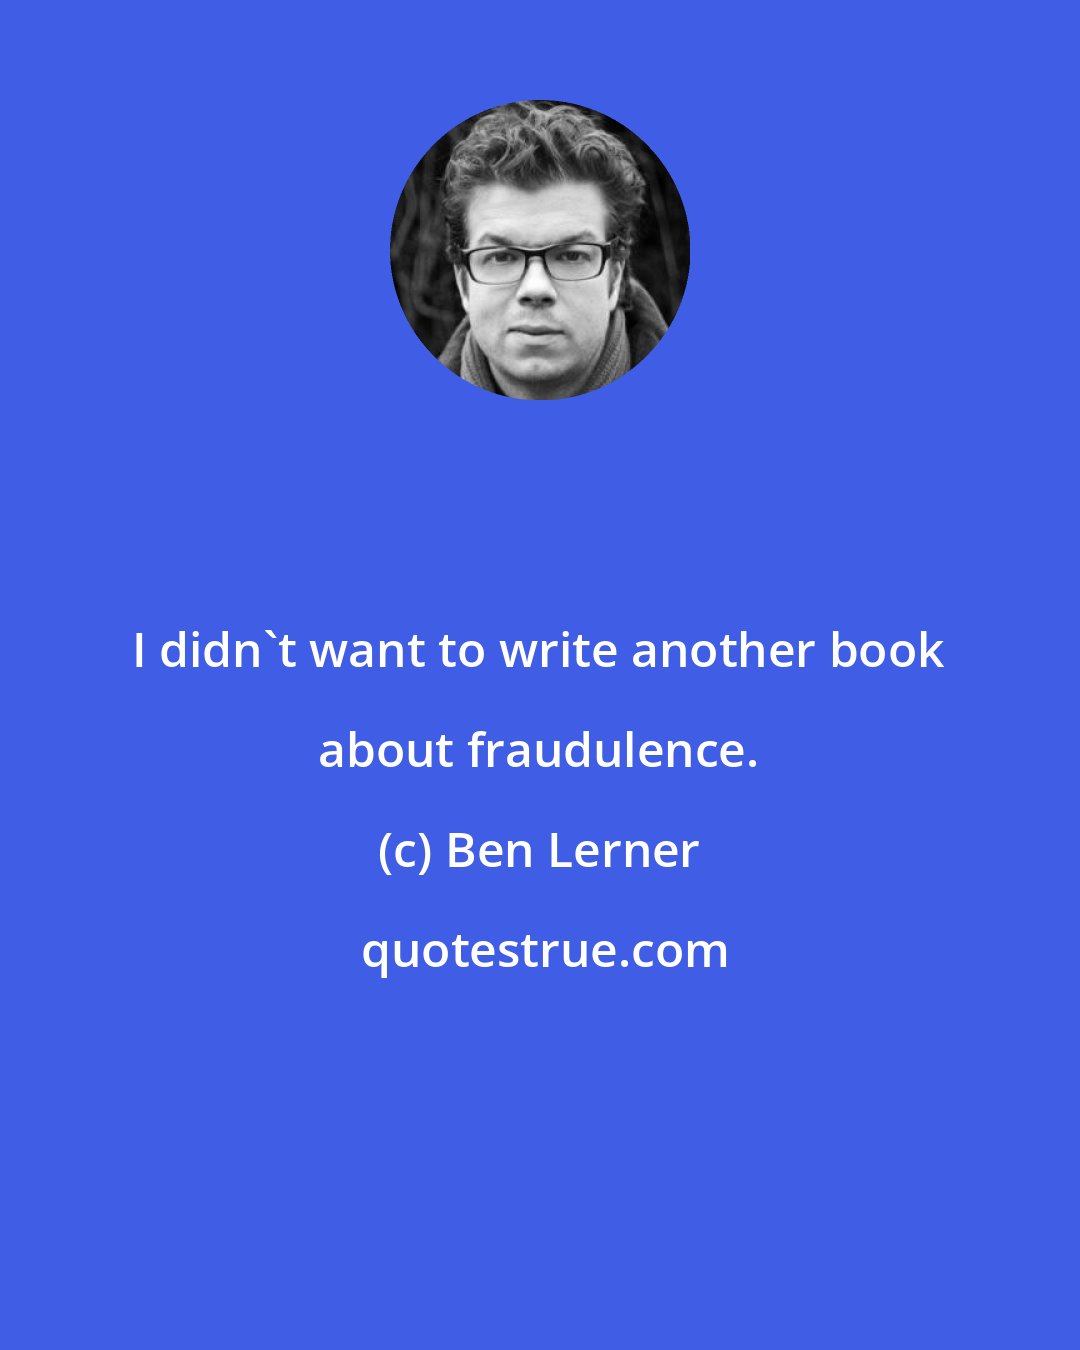 Ben Lerner: I didn't want to write another book about fraudulence.